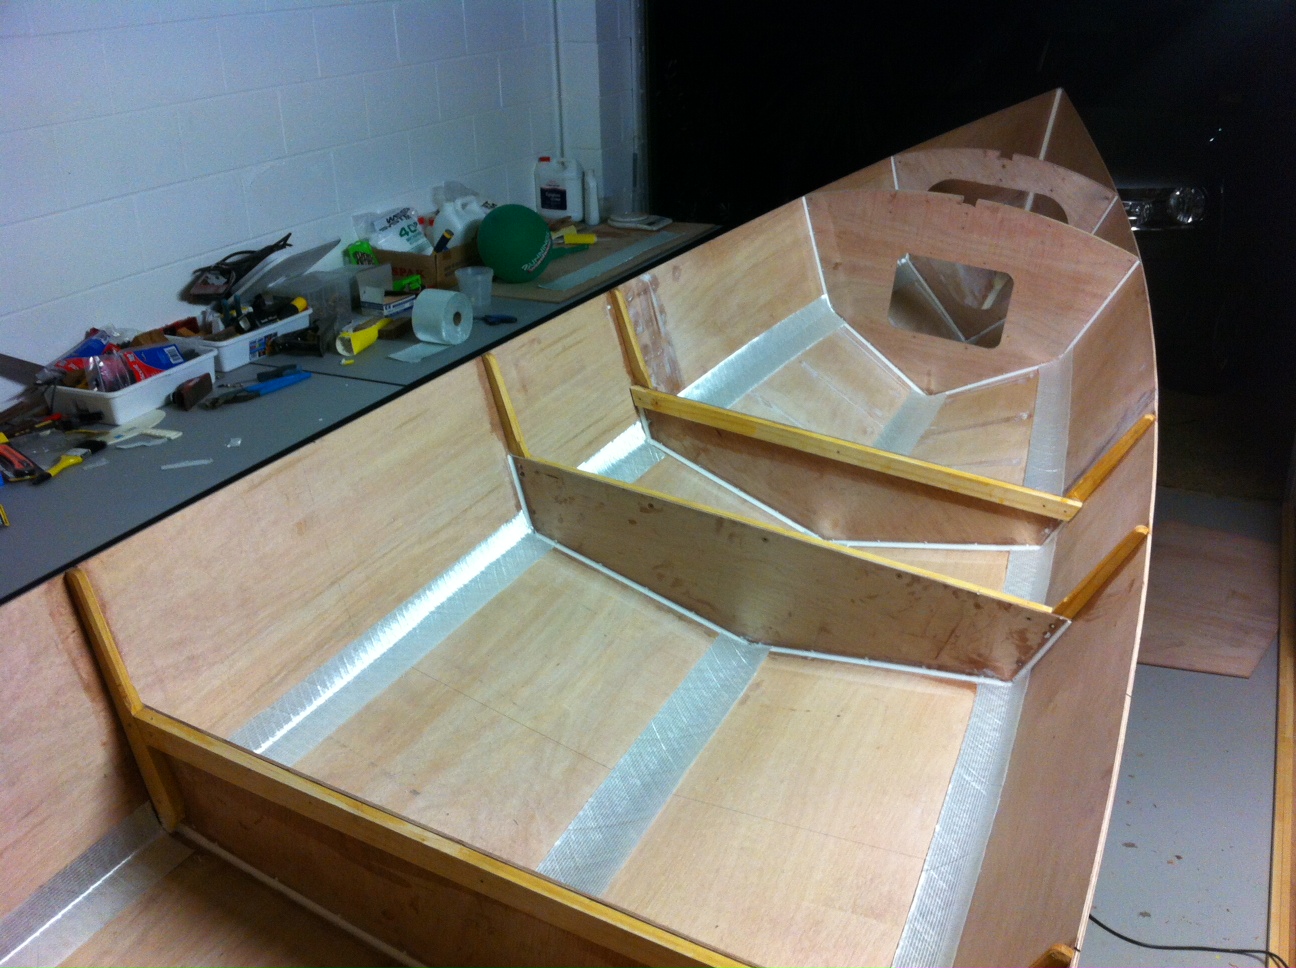 Will Shrapnel's boat being built using the stitch-and-glue method 